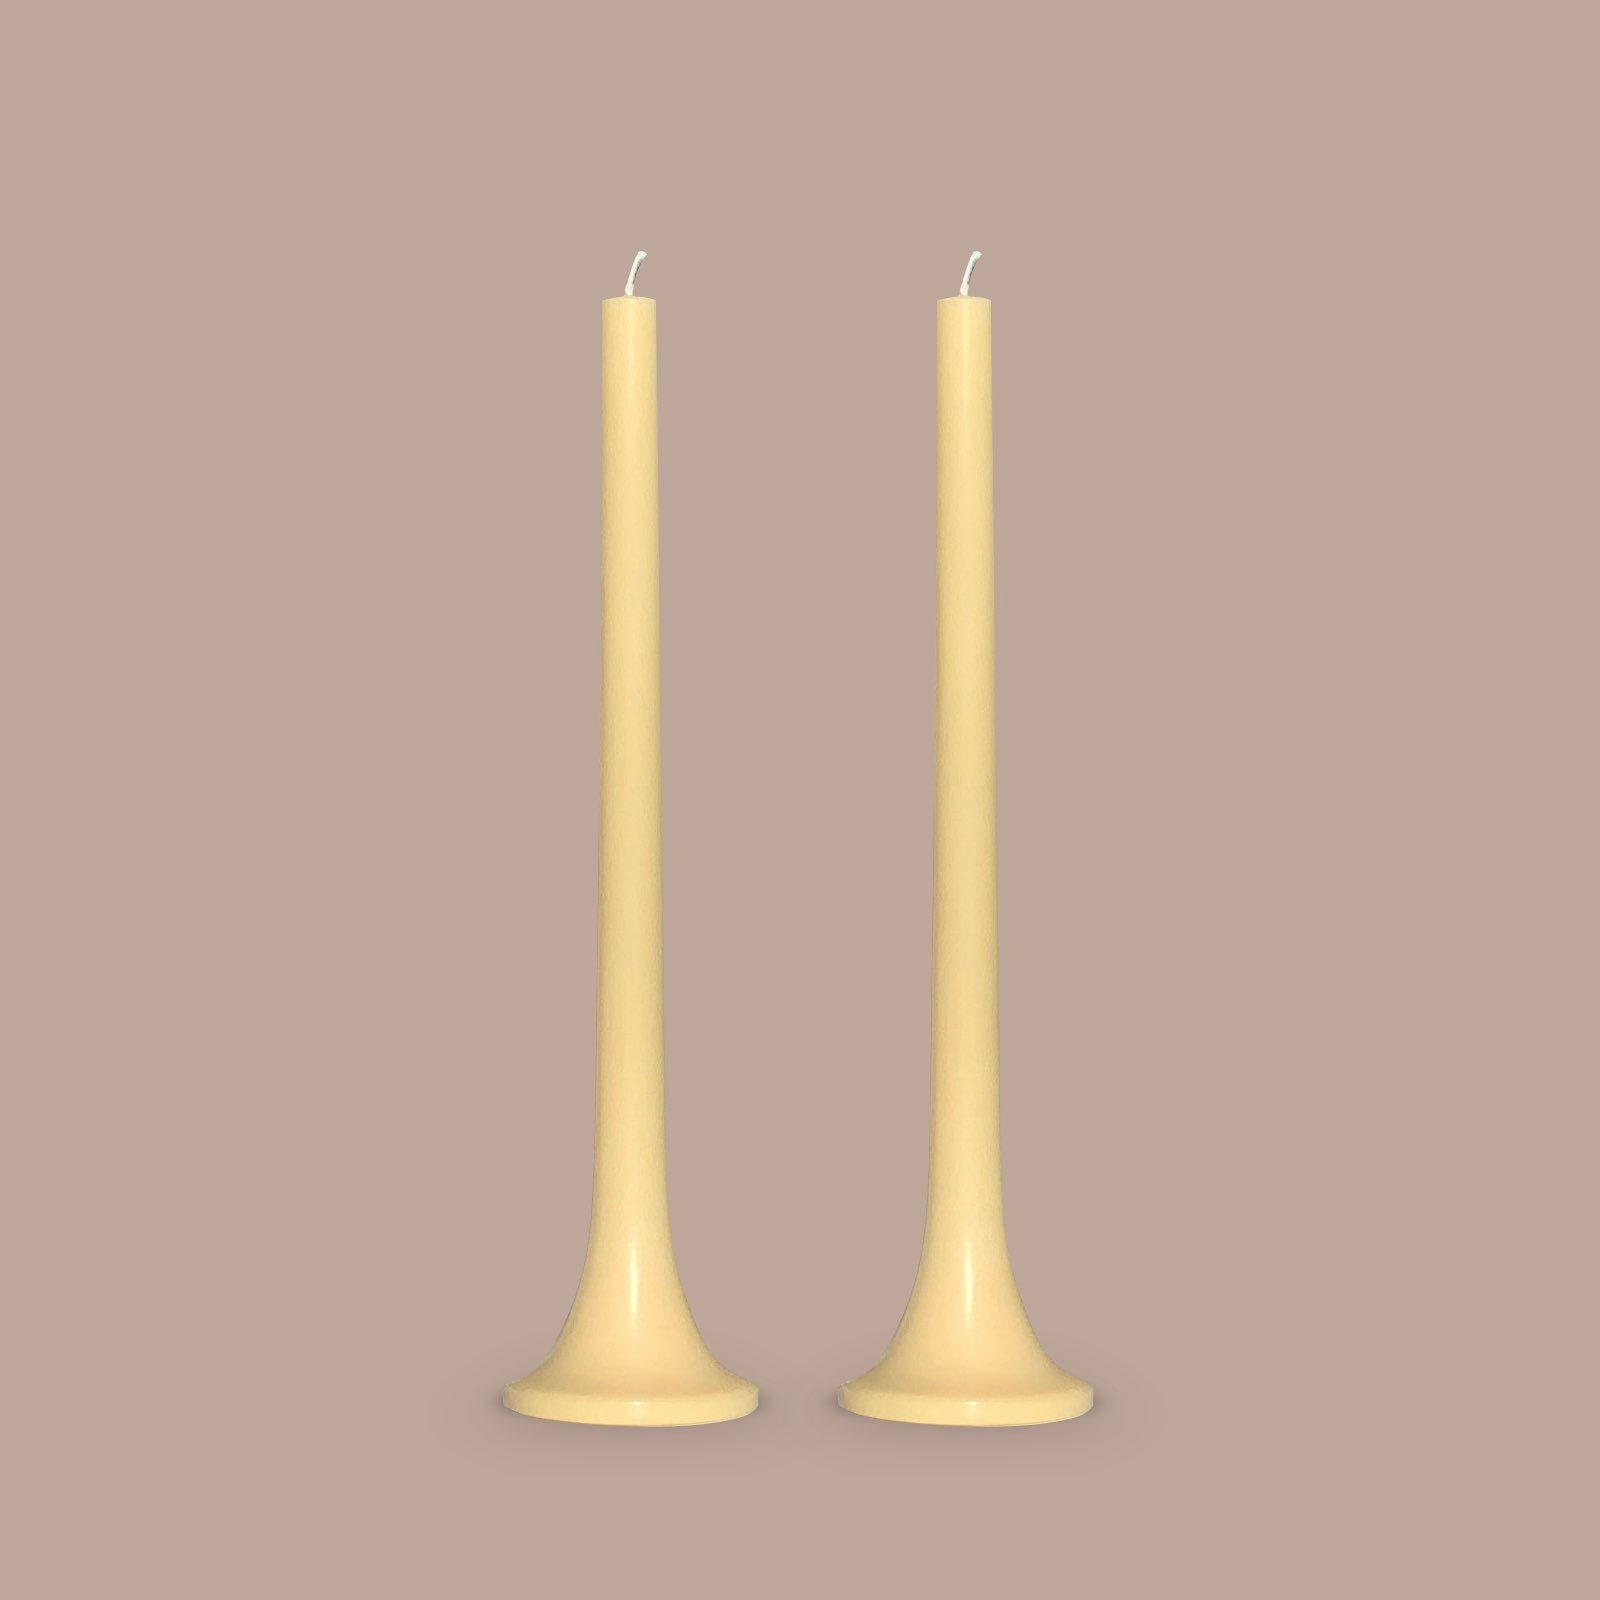 Designer dinner candles in pale yellow